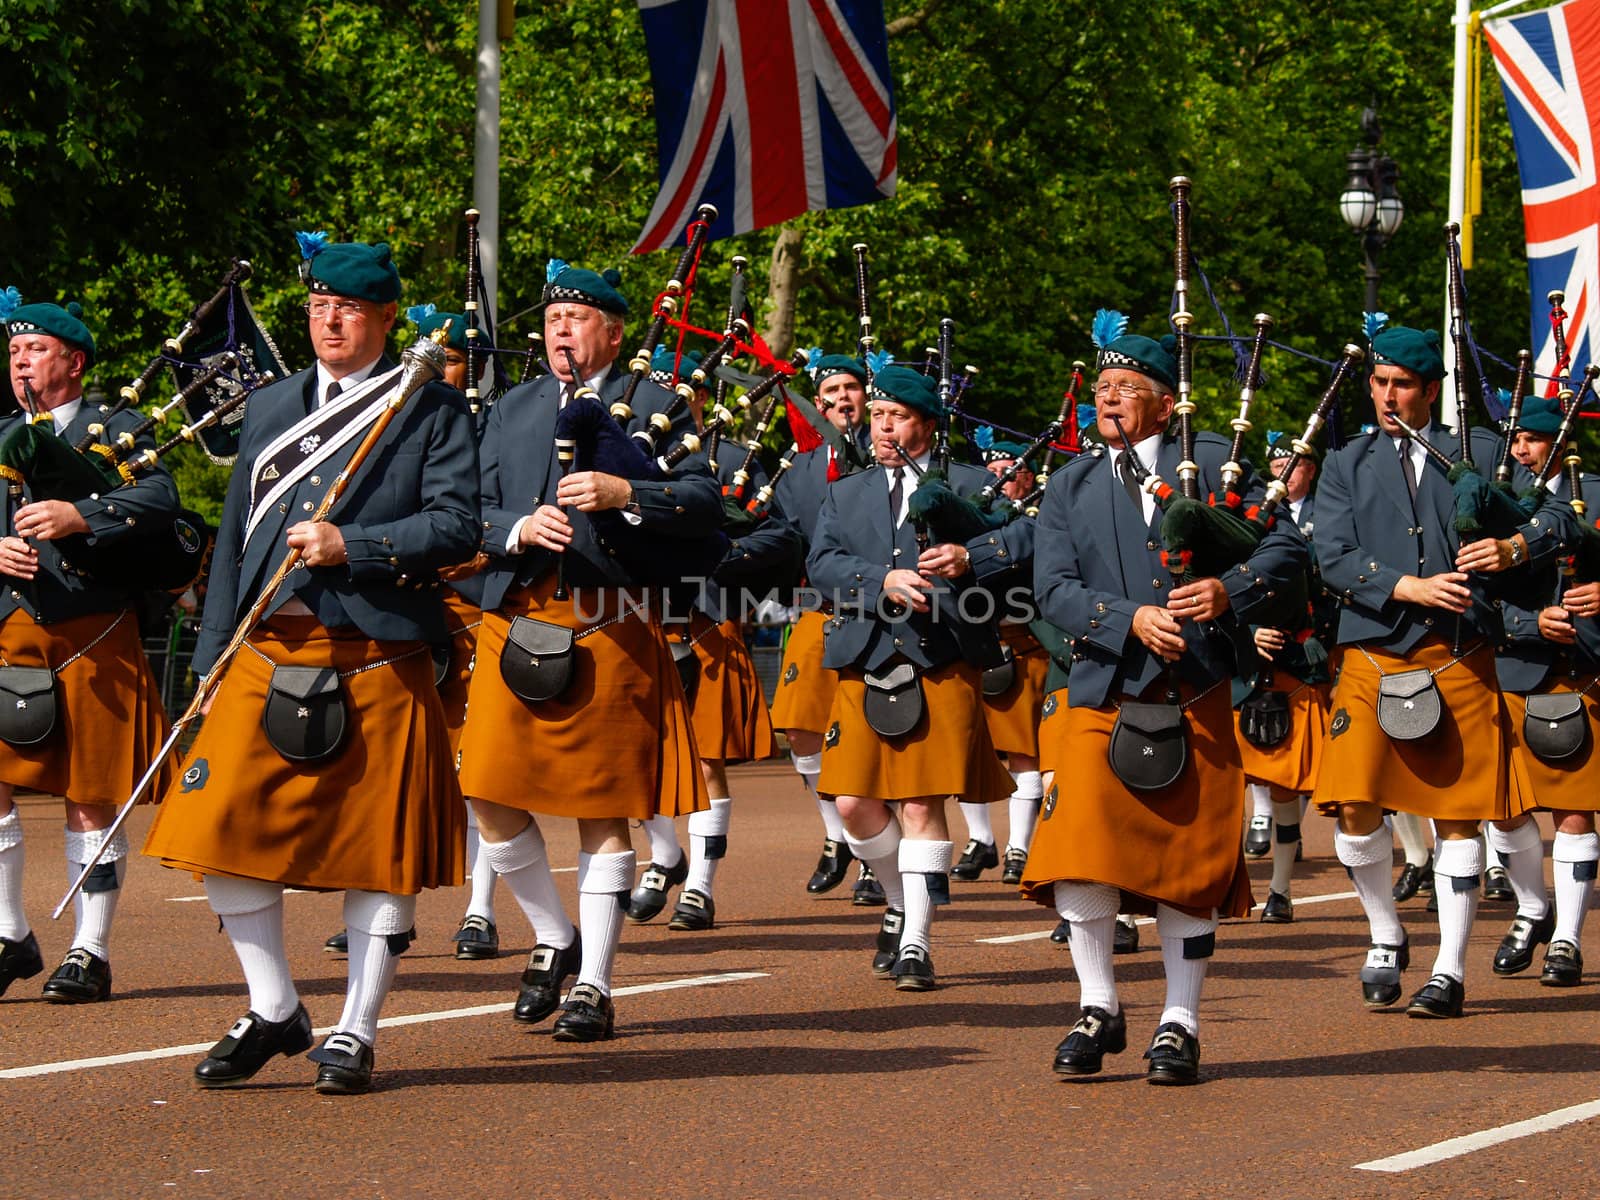 Bagpipers marching along Londons mall towards Buchingham Palace.